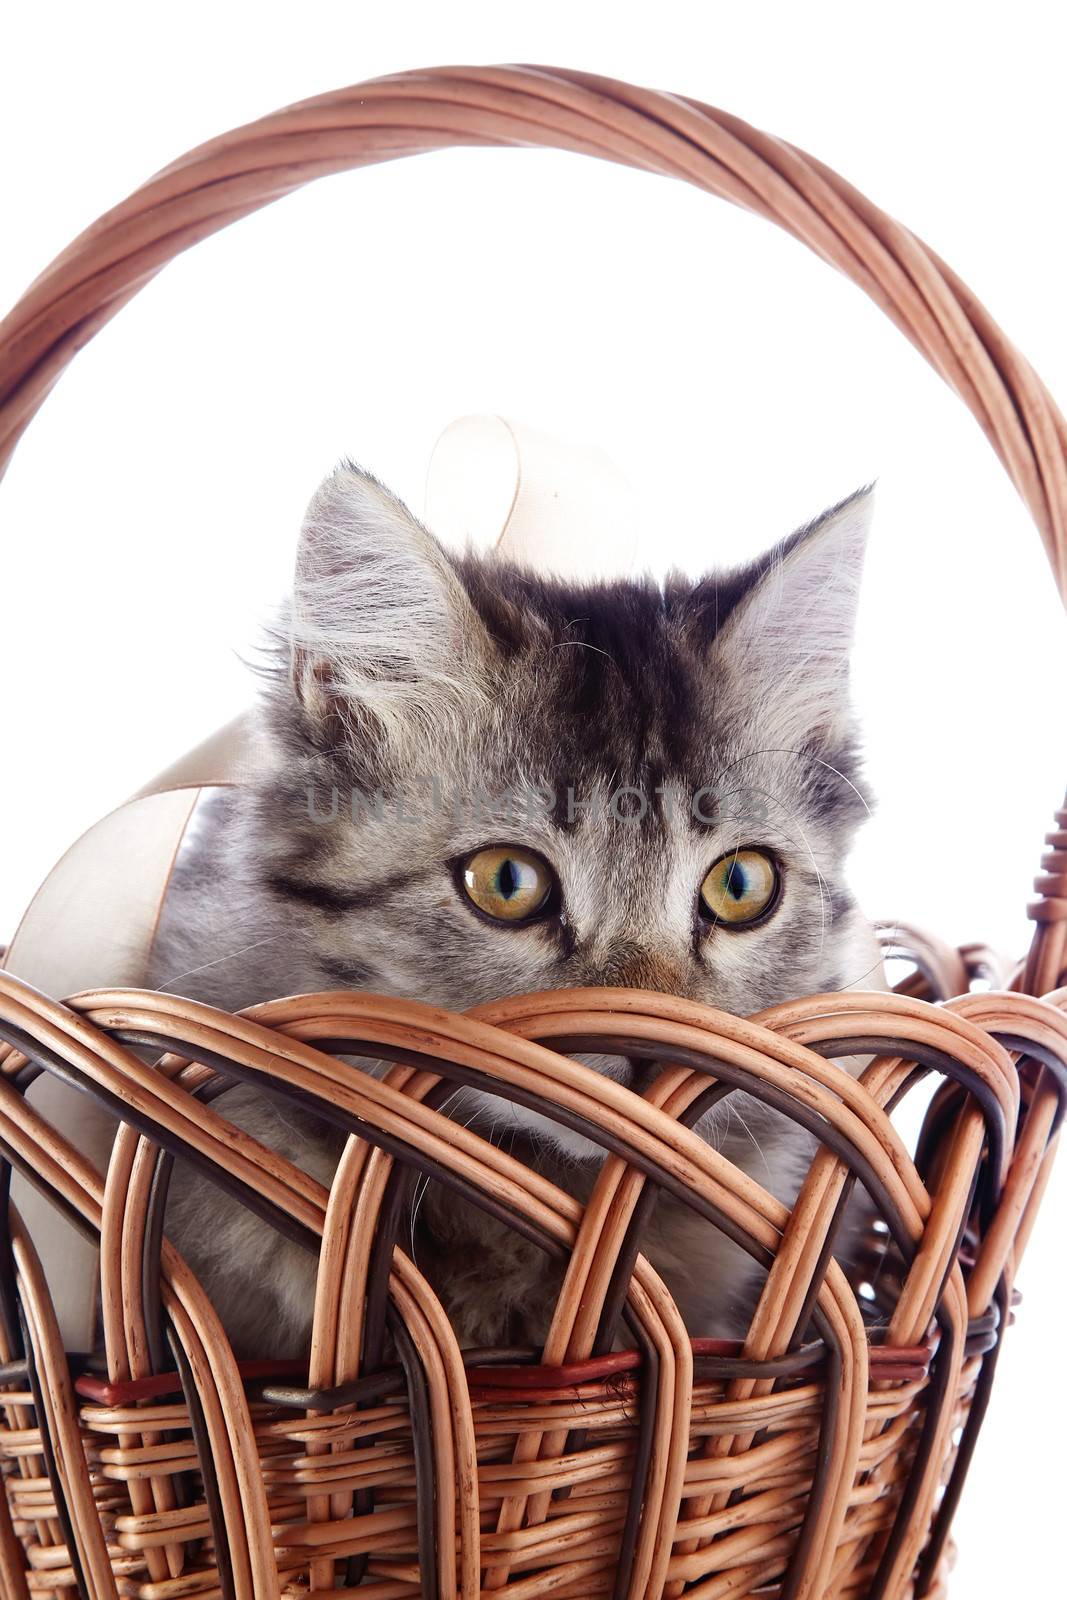 The striped cat looks from a wattled basket. Fluffy cat with yellow eyes.  Striped not purebred kitten. Kitten on a white background. Small predator. Small cat.